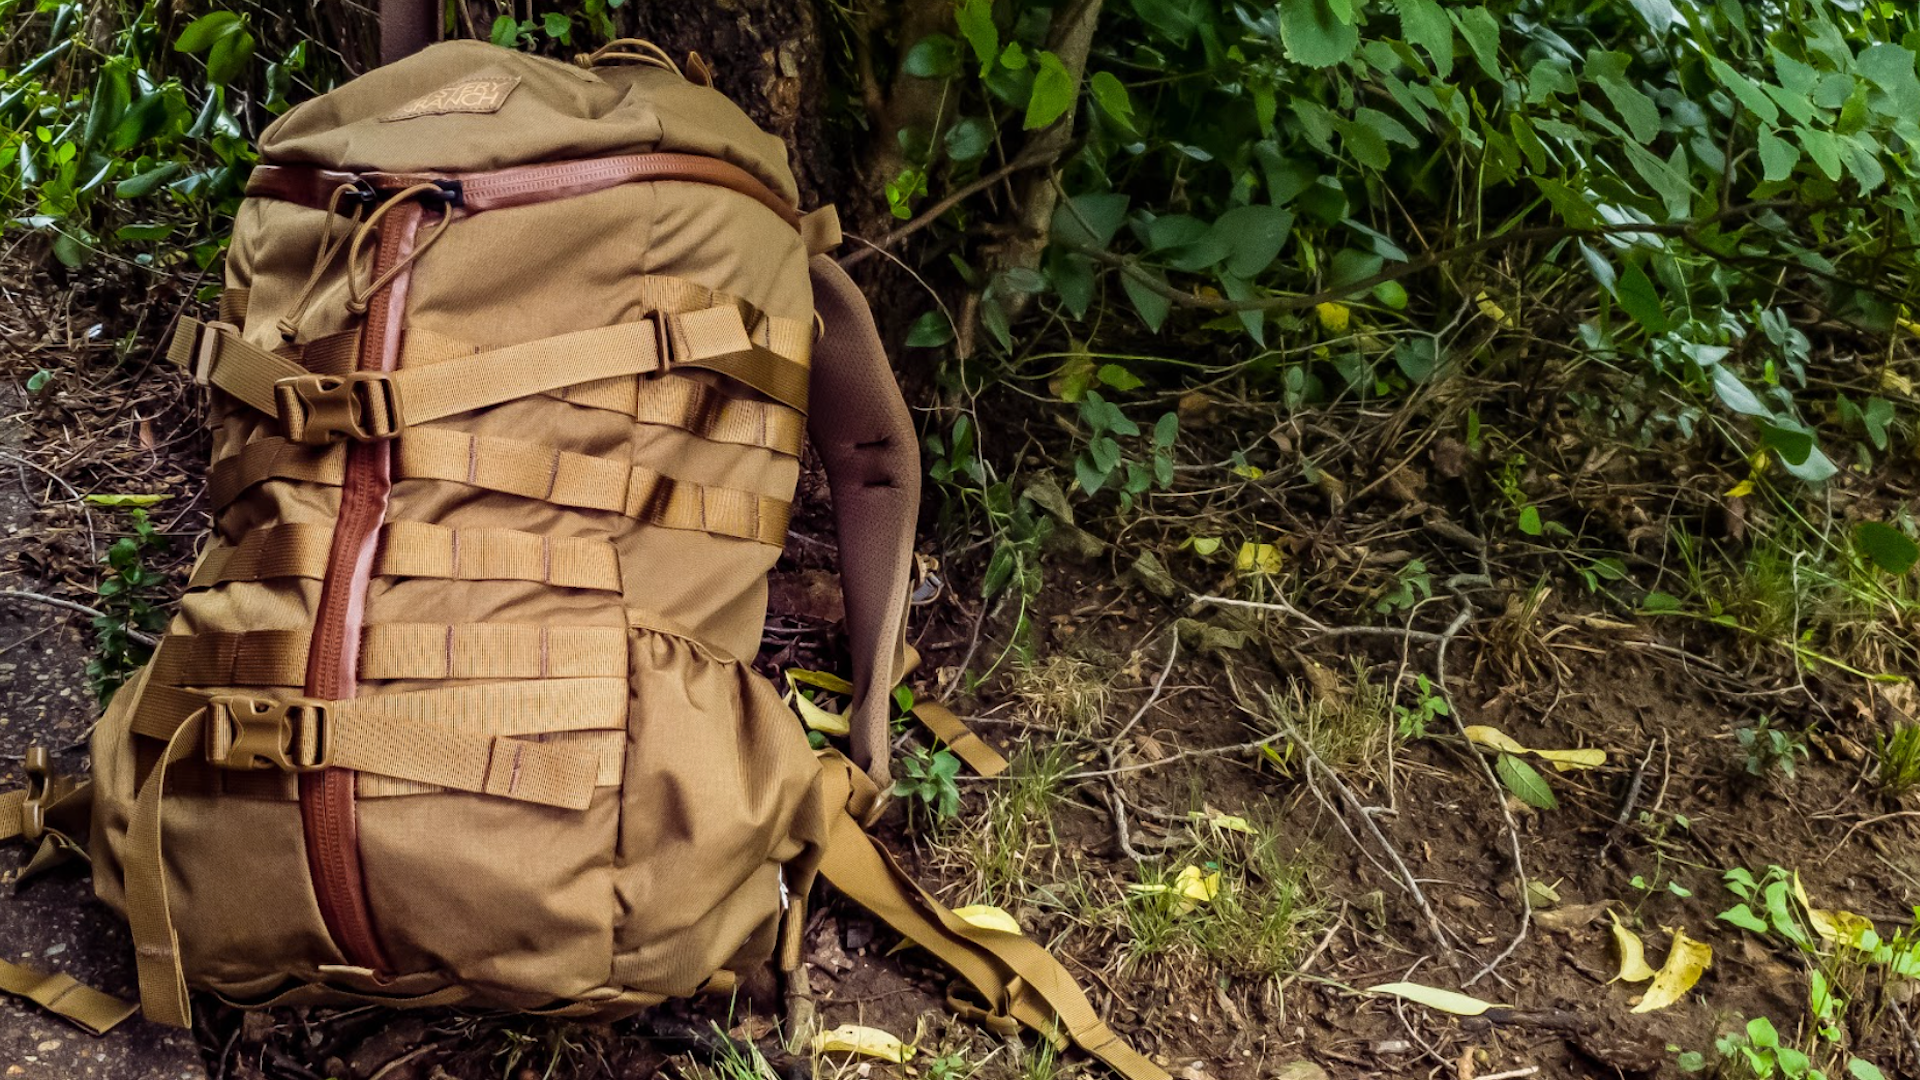 Mystery Ranch 2-Day Assault Pack (Review) 2021 - Task & Purpose